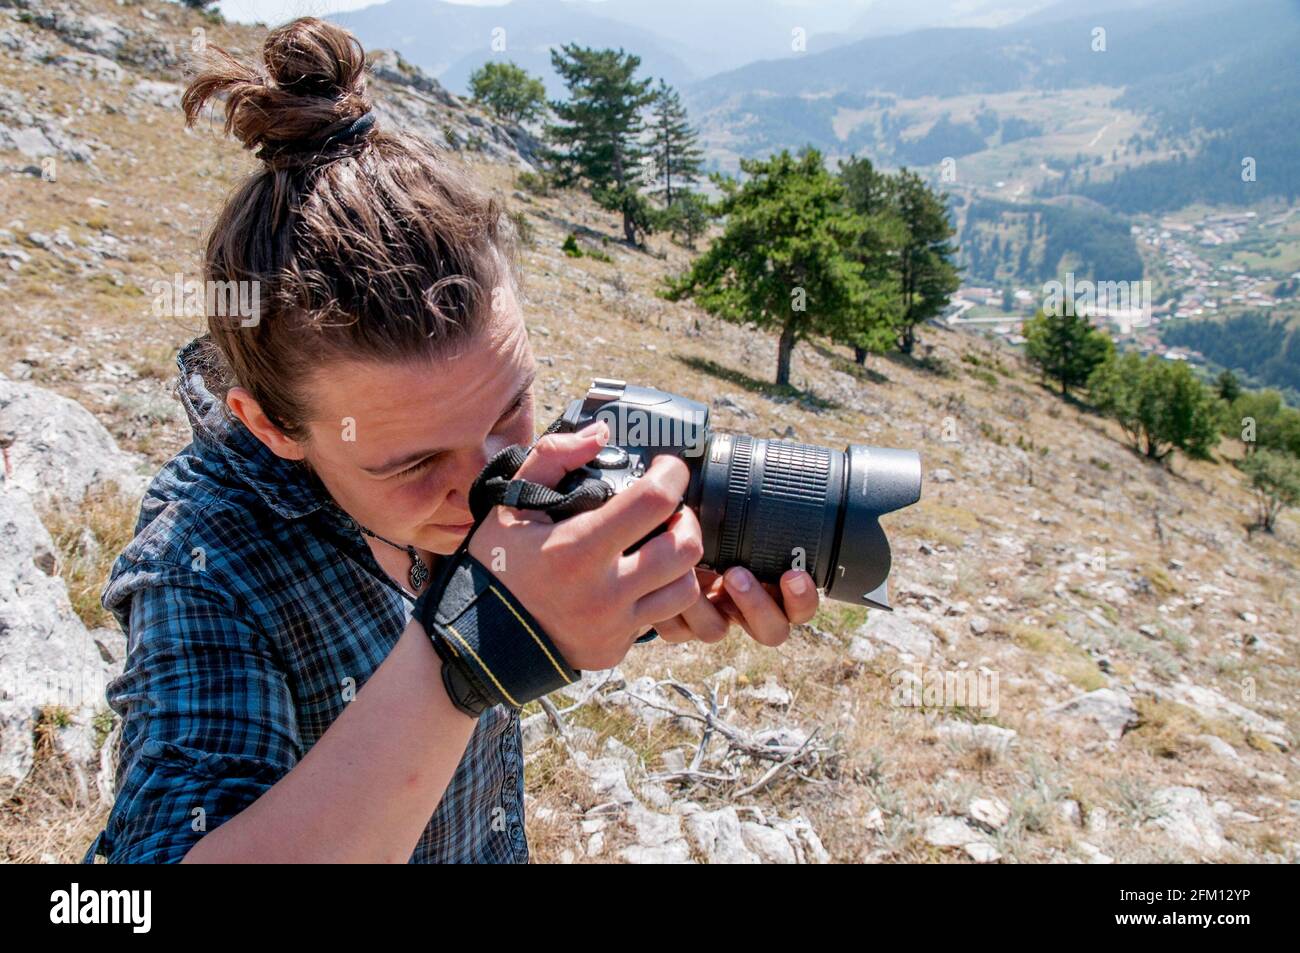 A young woman taking a photo on a mountain. Lifestyle blogging / vlogging about healthy living, nature and outdoors. Stock Photo